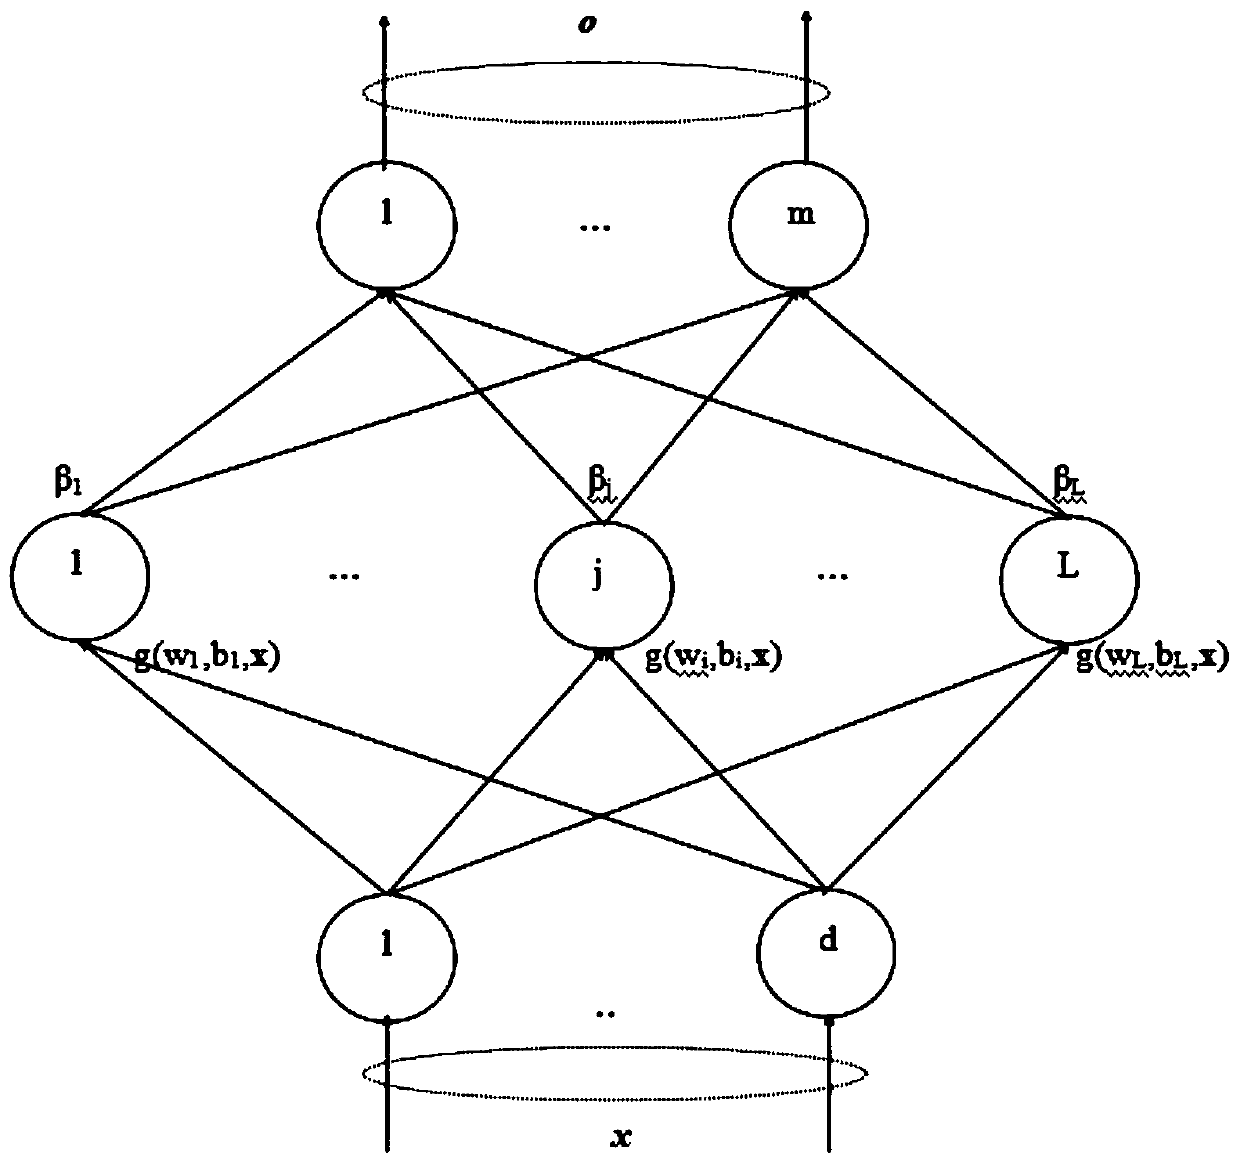 Single classifier anomaly detection method based on multilayer random neural network